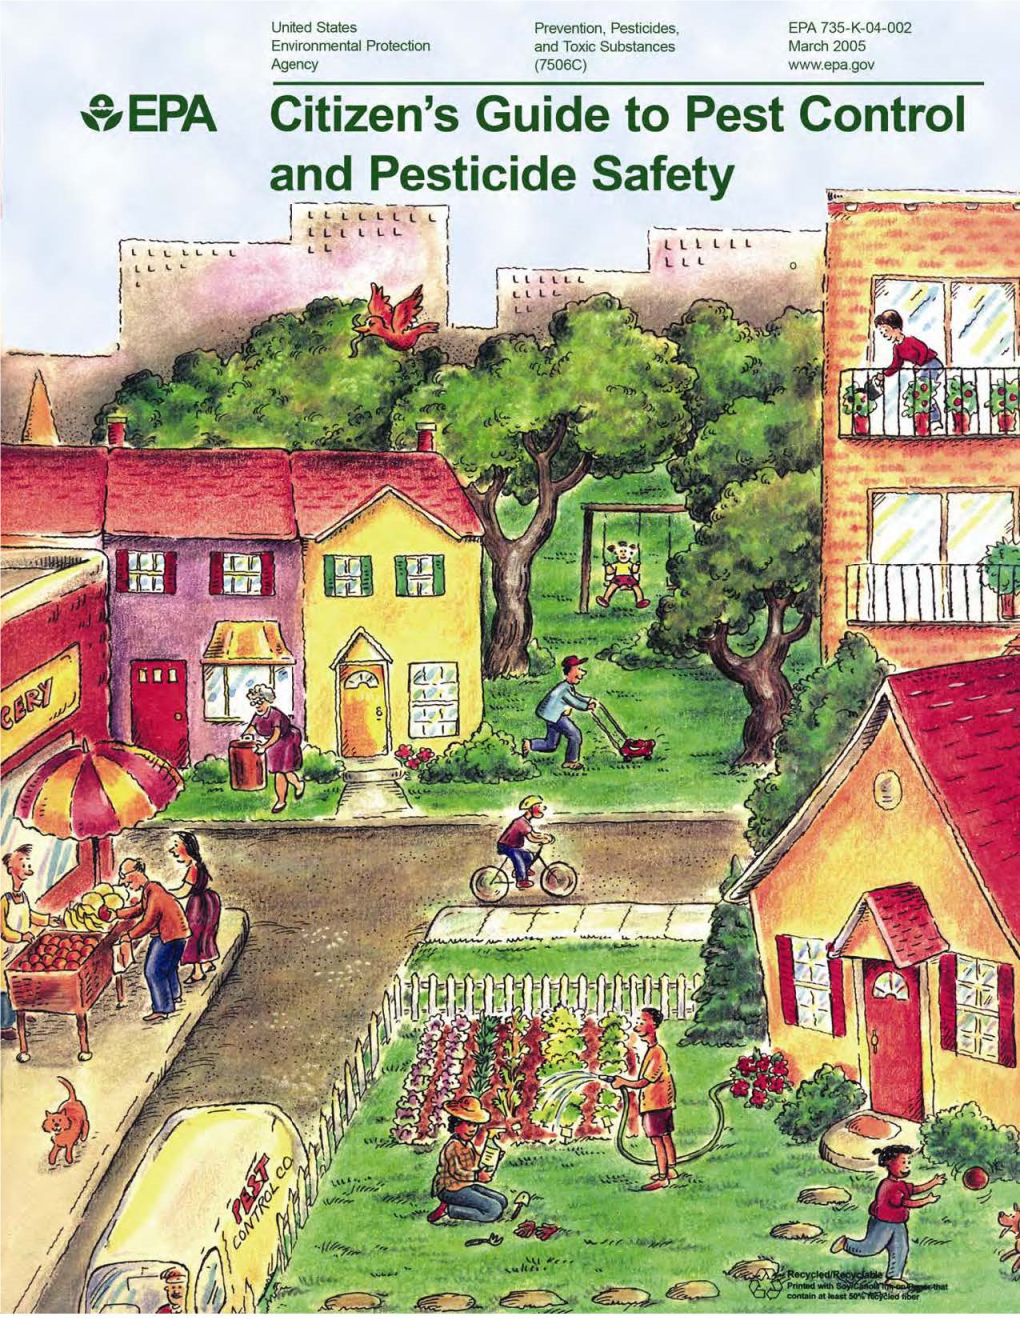 Citizen's Guide to Pest Control and Pesticide Safety -L ~ LL ~) L Ll..Llll I LL I 117L~ L L 0~~-- L L L I L 1